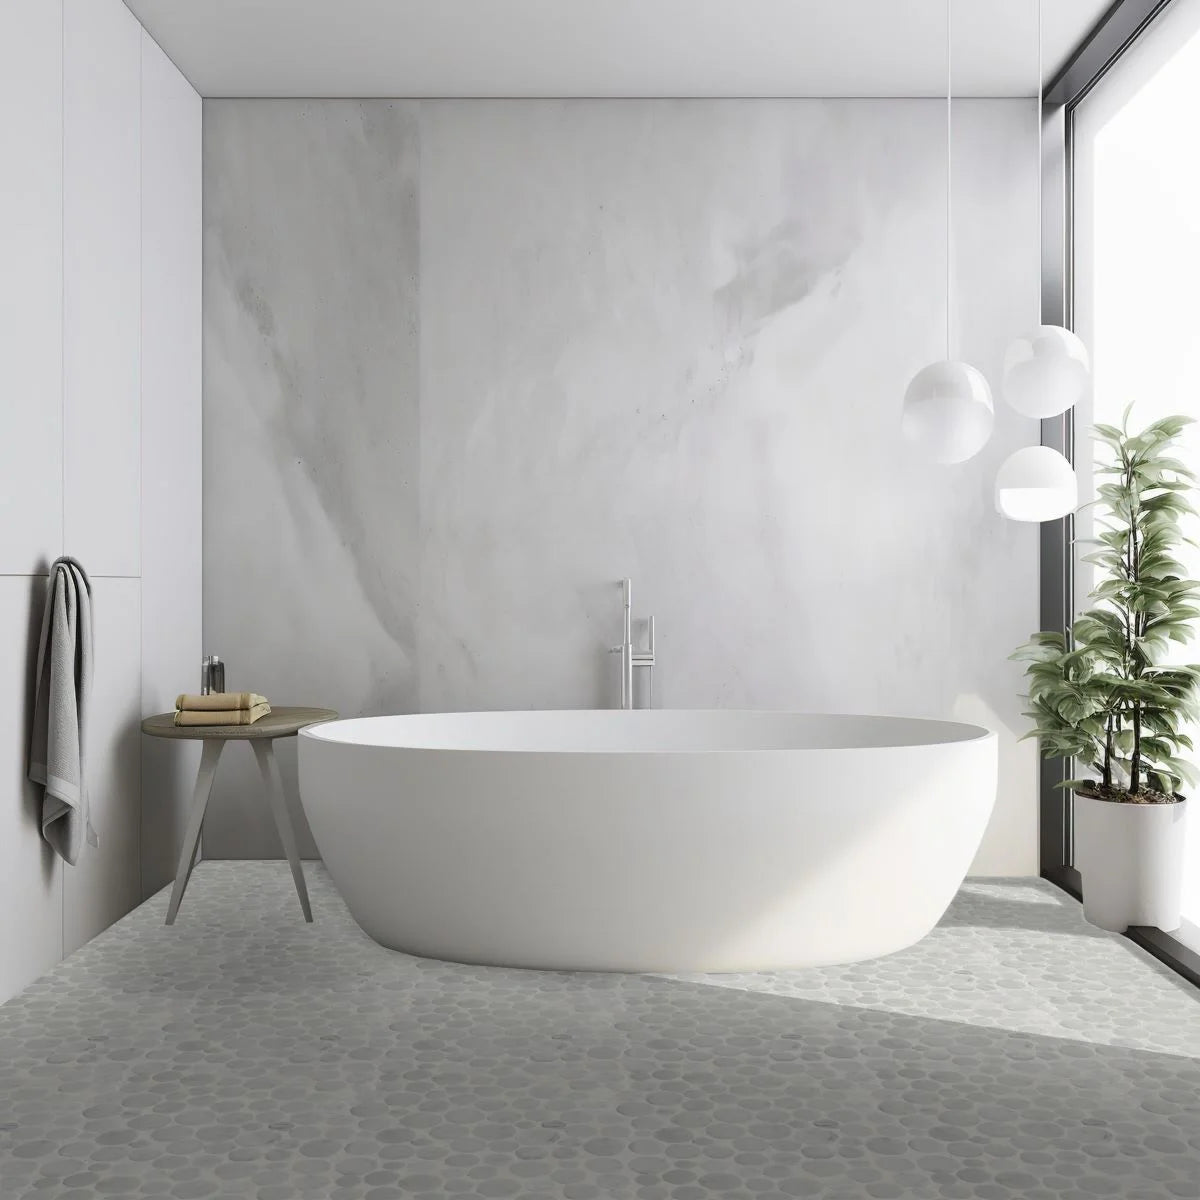 penny carrara pebble tile flooring with white bathtub sitting on top of it